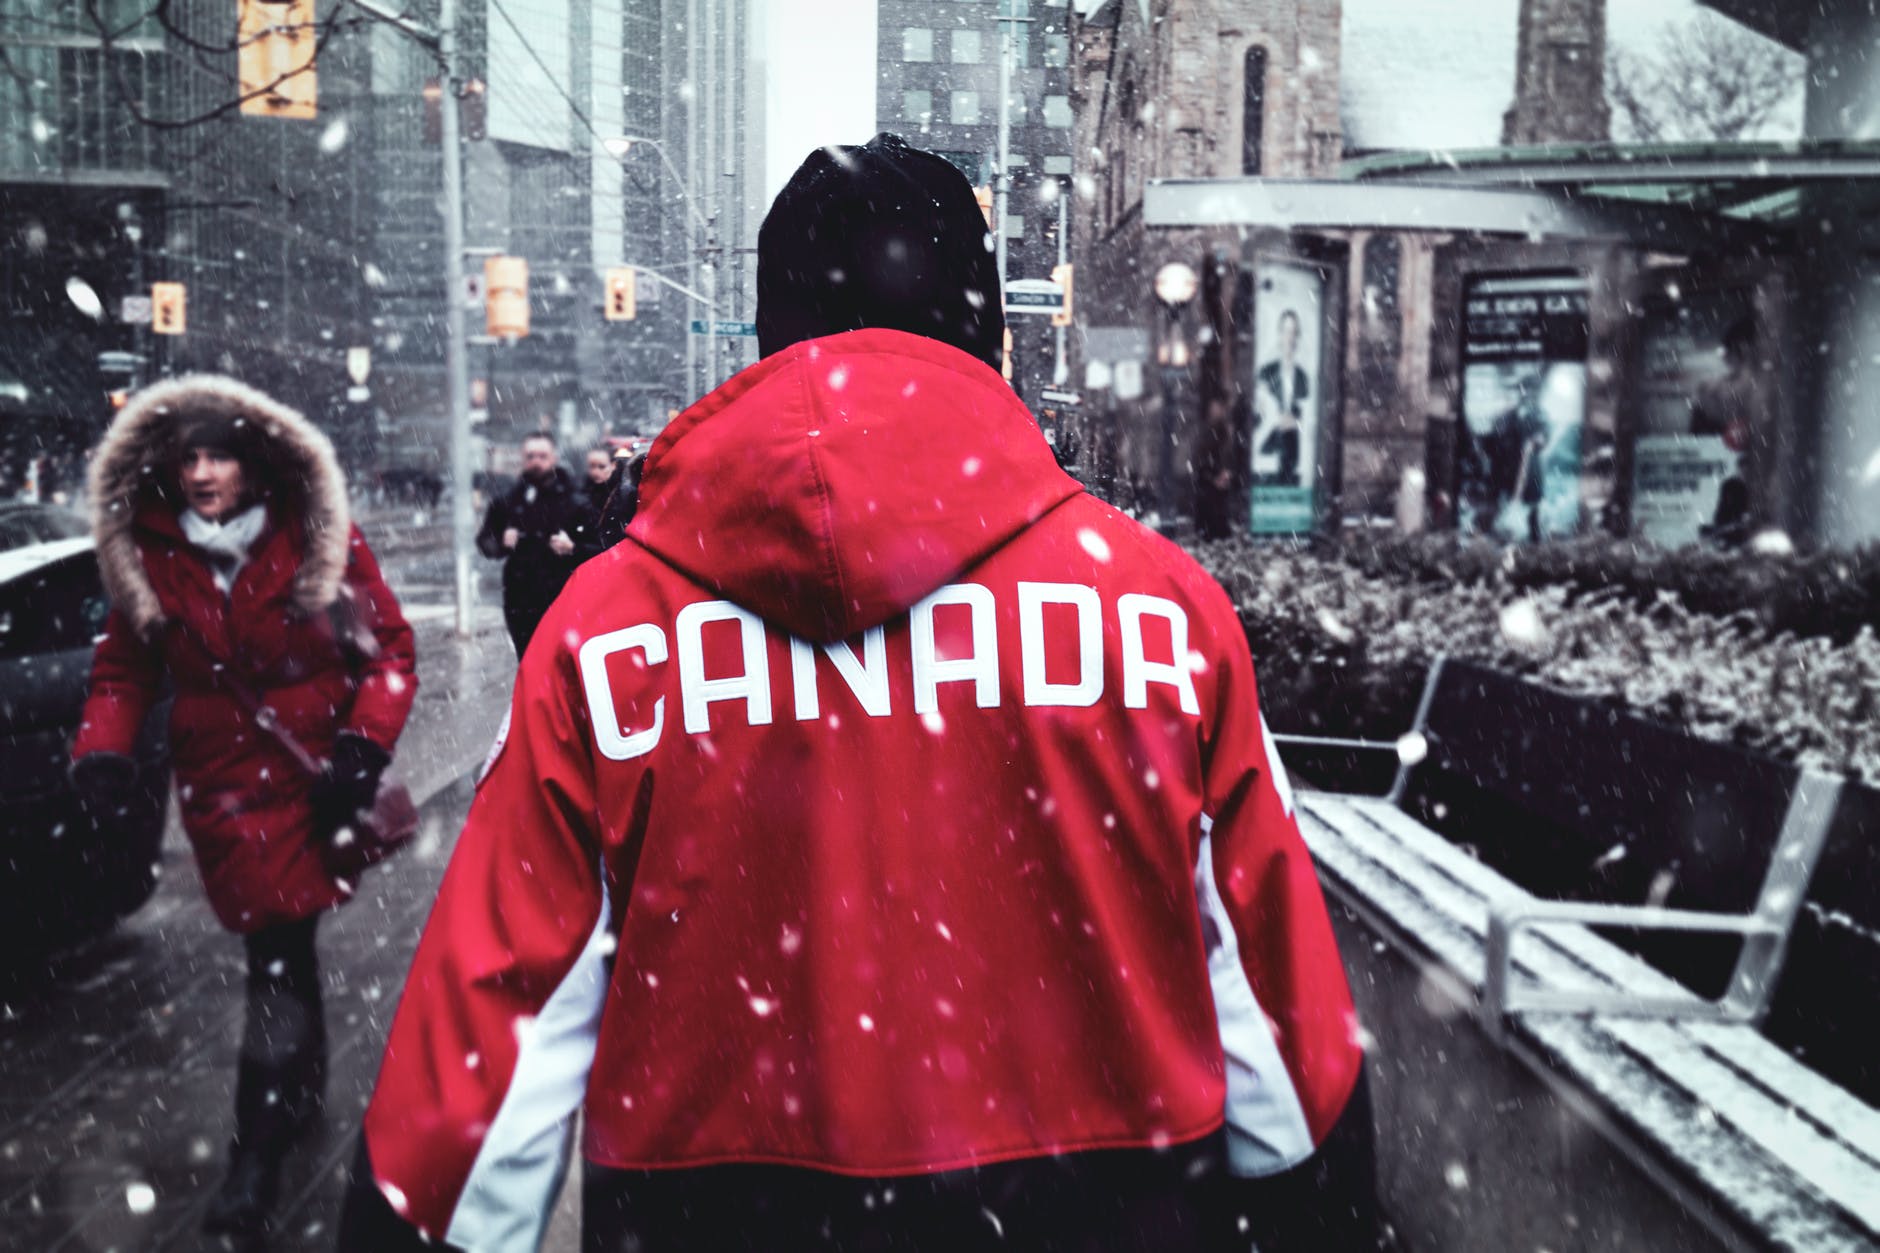 person outside wearing a coat with ‘Canada’ written on it